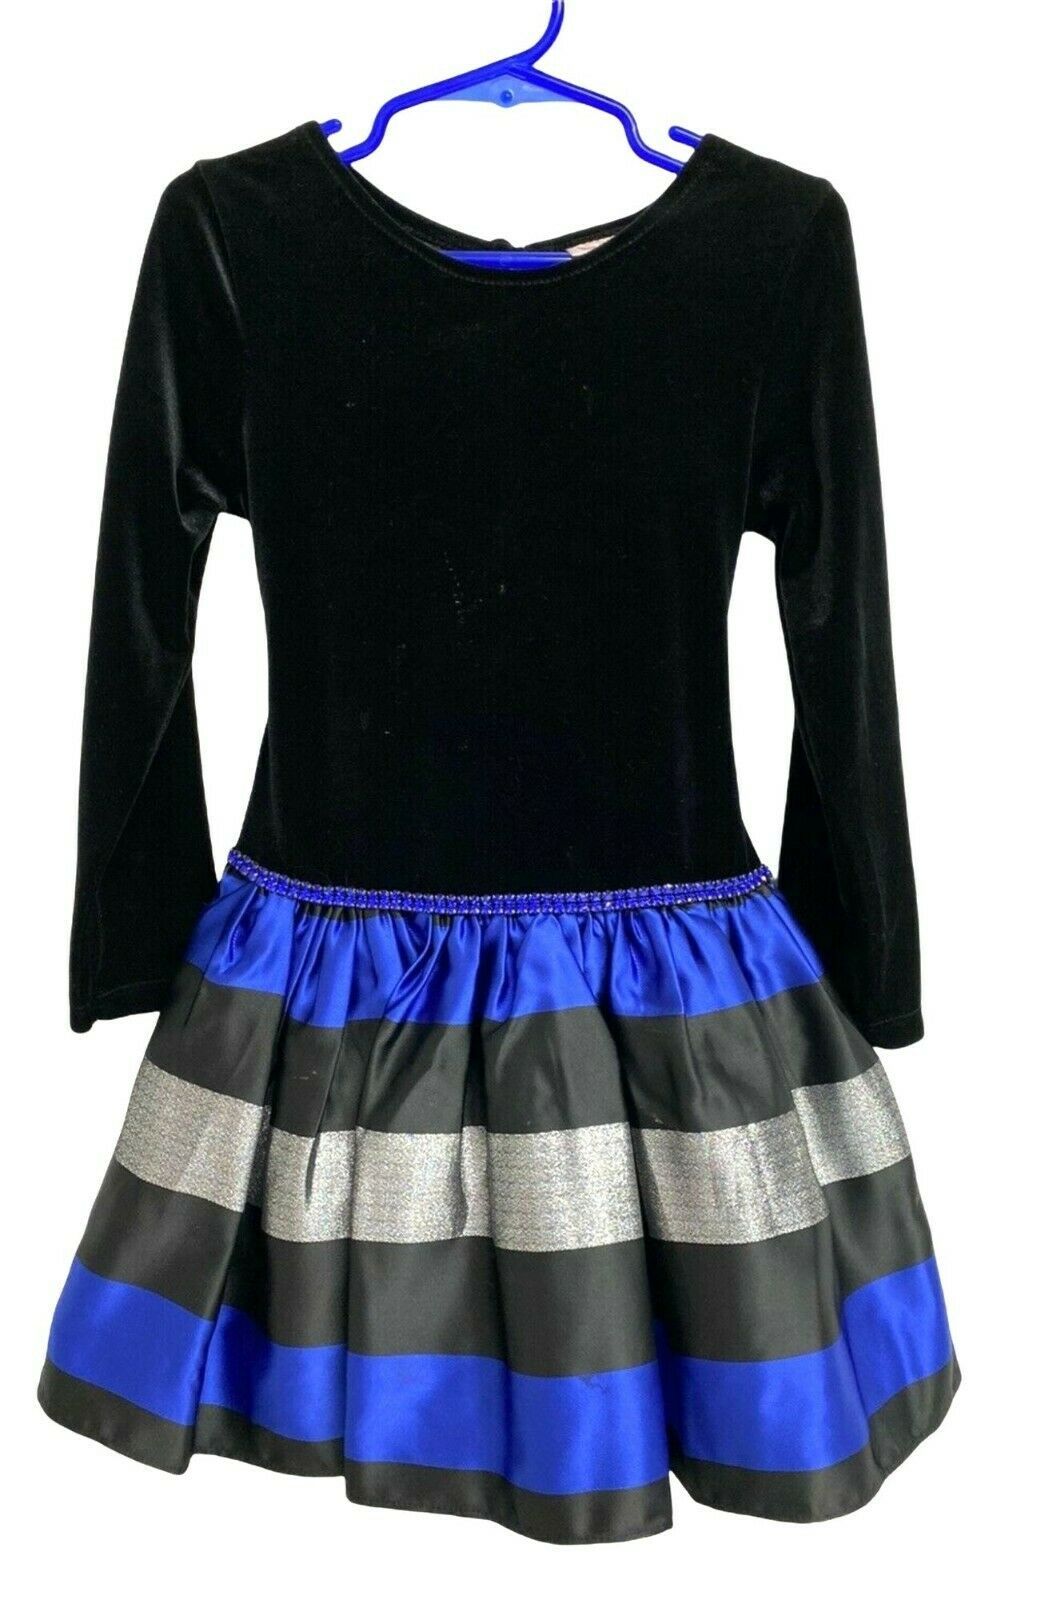 Primary image for Youngland girls dress formal long sleeve striped black blue size 5